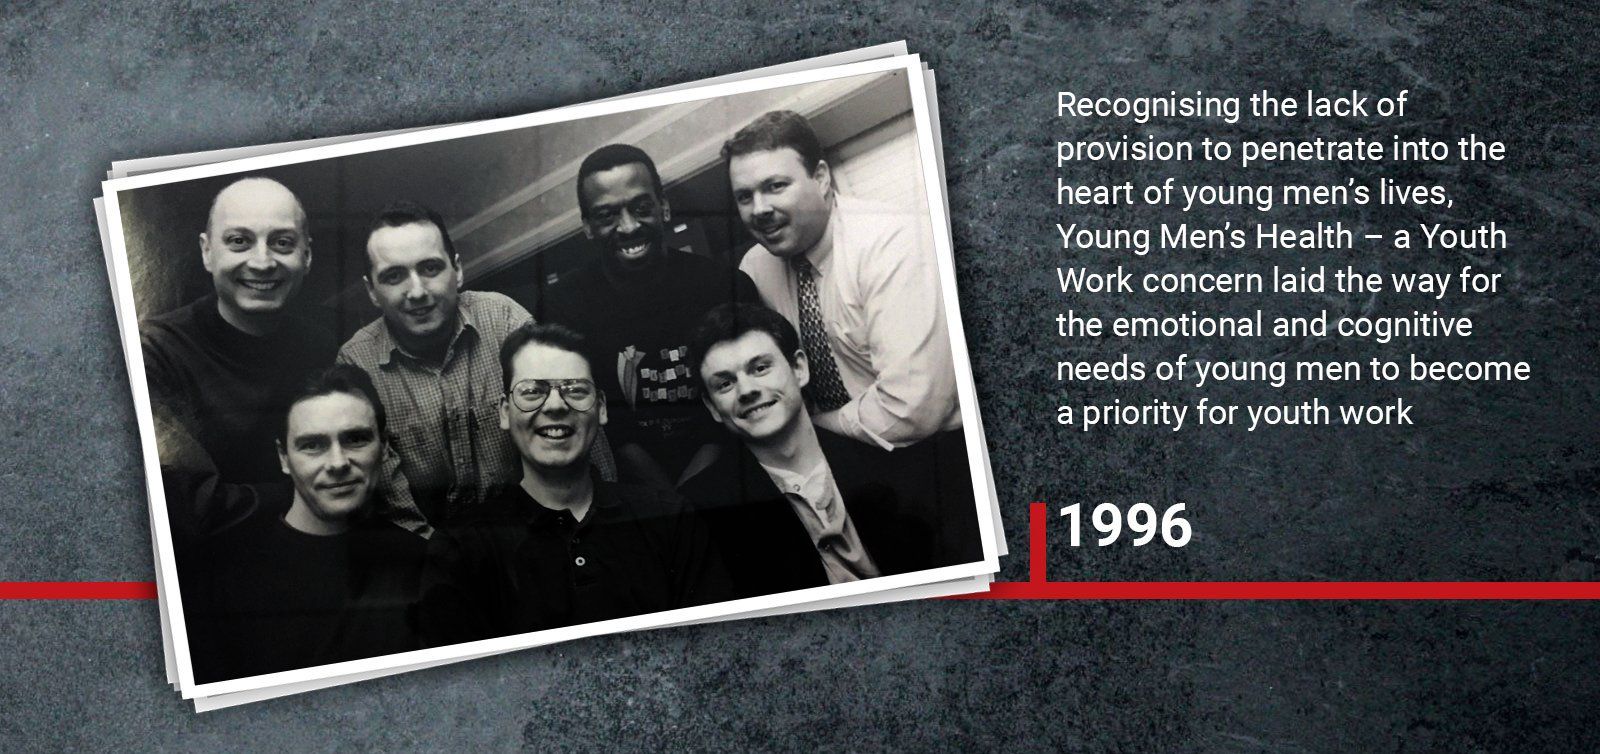 1996 Recognising the lack of provision to penetrate into the heart of young men’s lives, Young Men’s Health – a Youth Work concern laid the way for the emotional and cognitive needs of young men to become a priority for youth work.